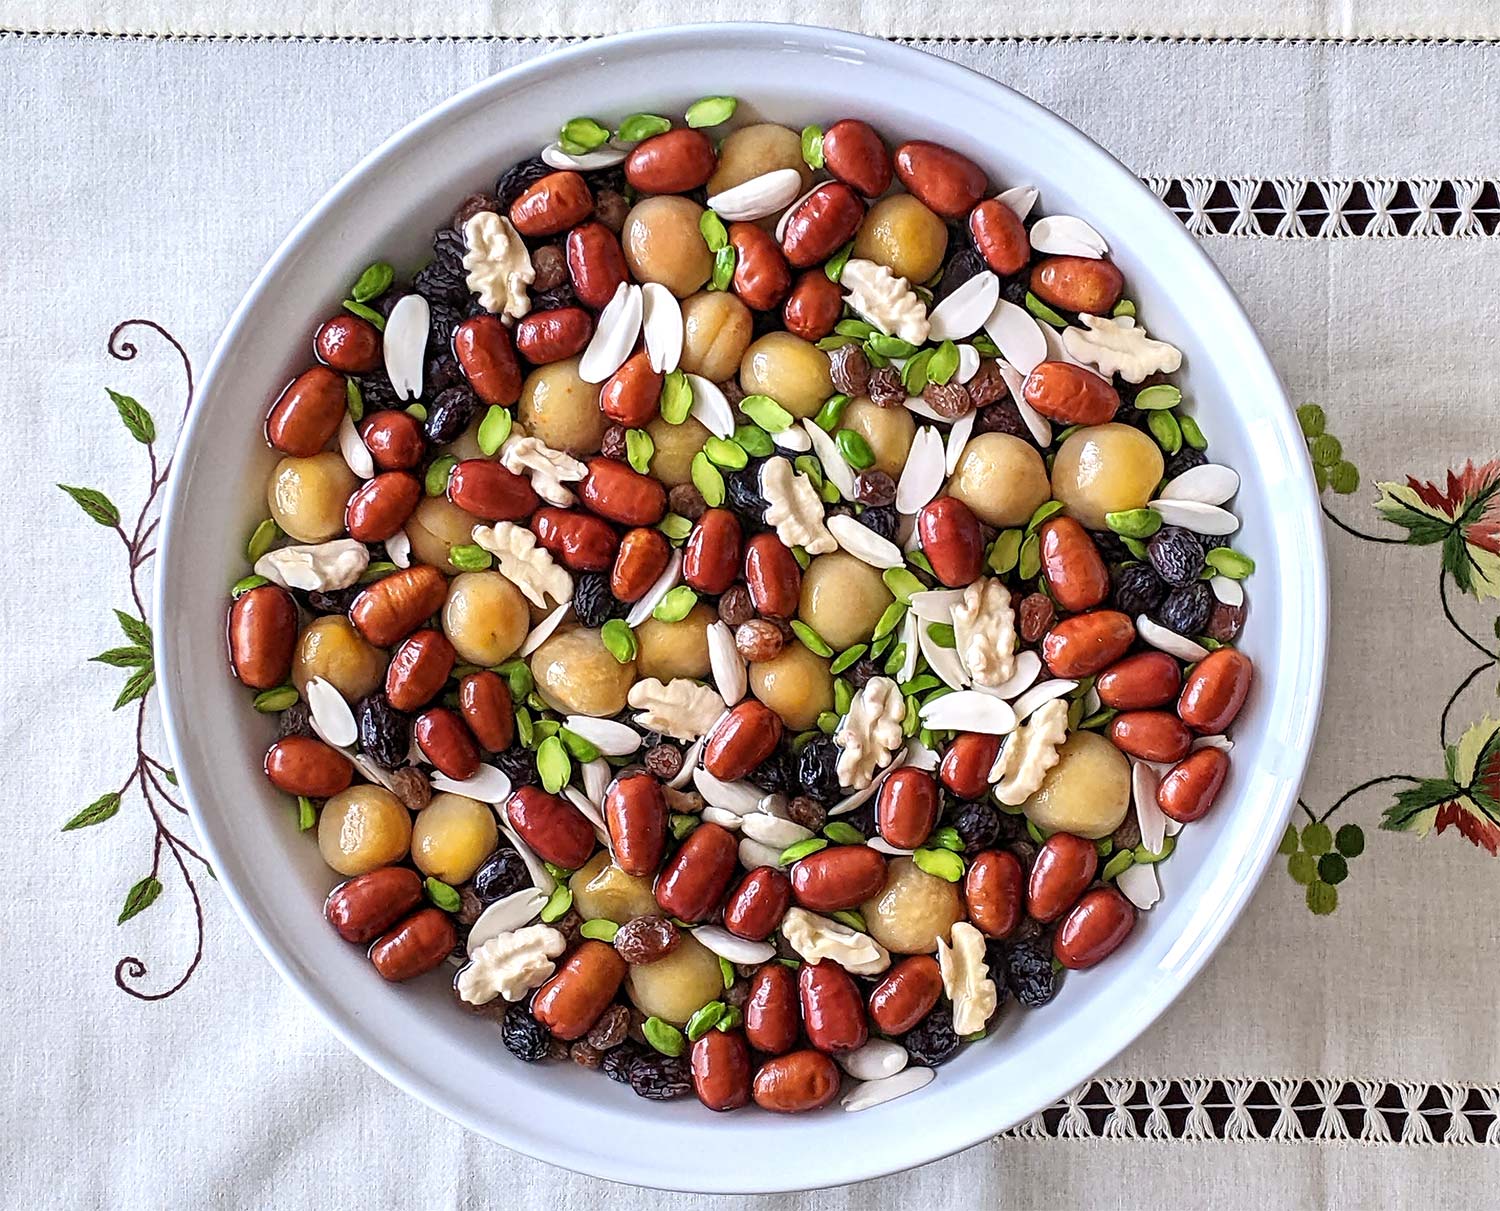 Haft Mewa Is A Traditional Afghan Fruit Salad That Is Usually Served During Nowruz.